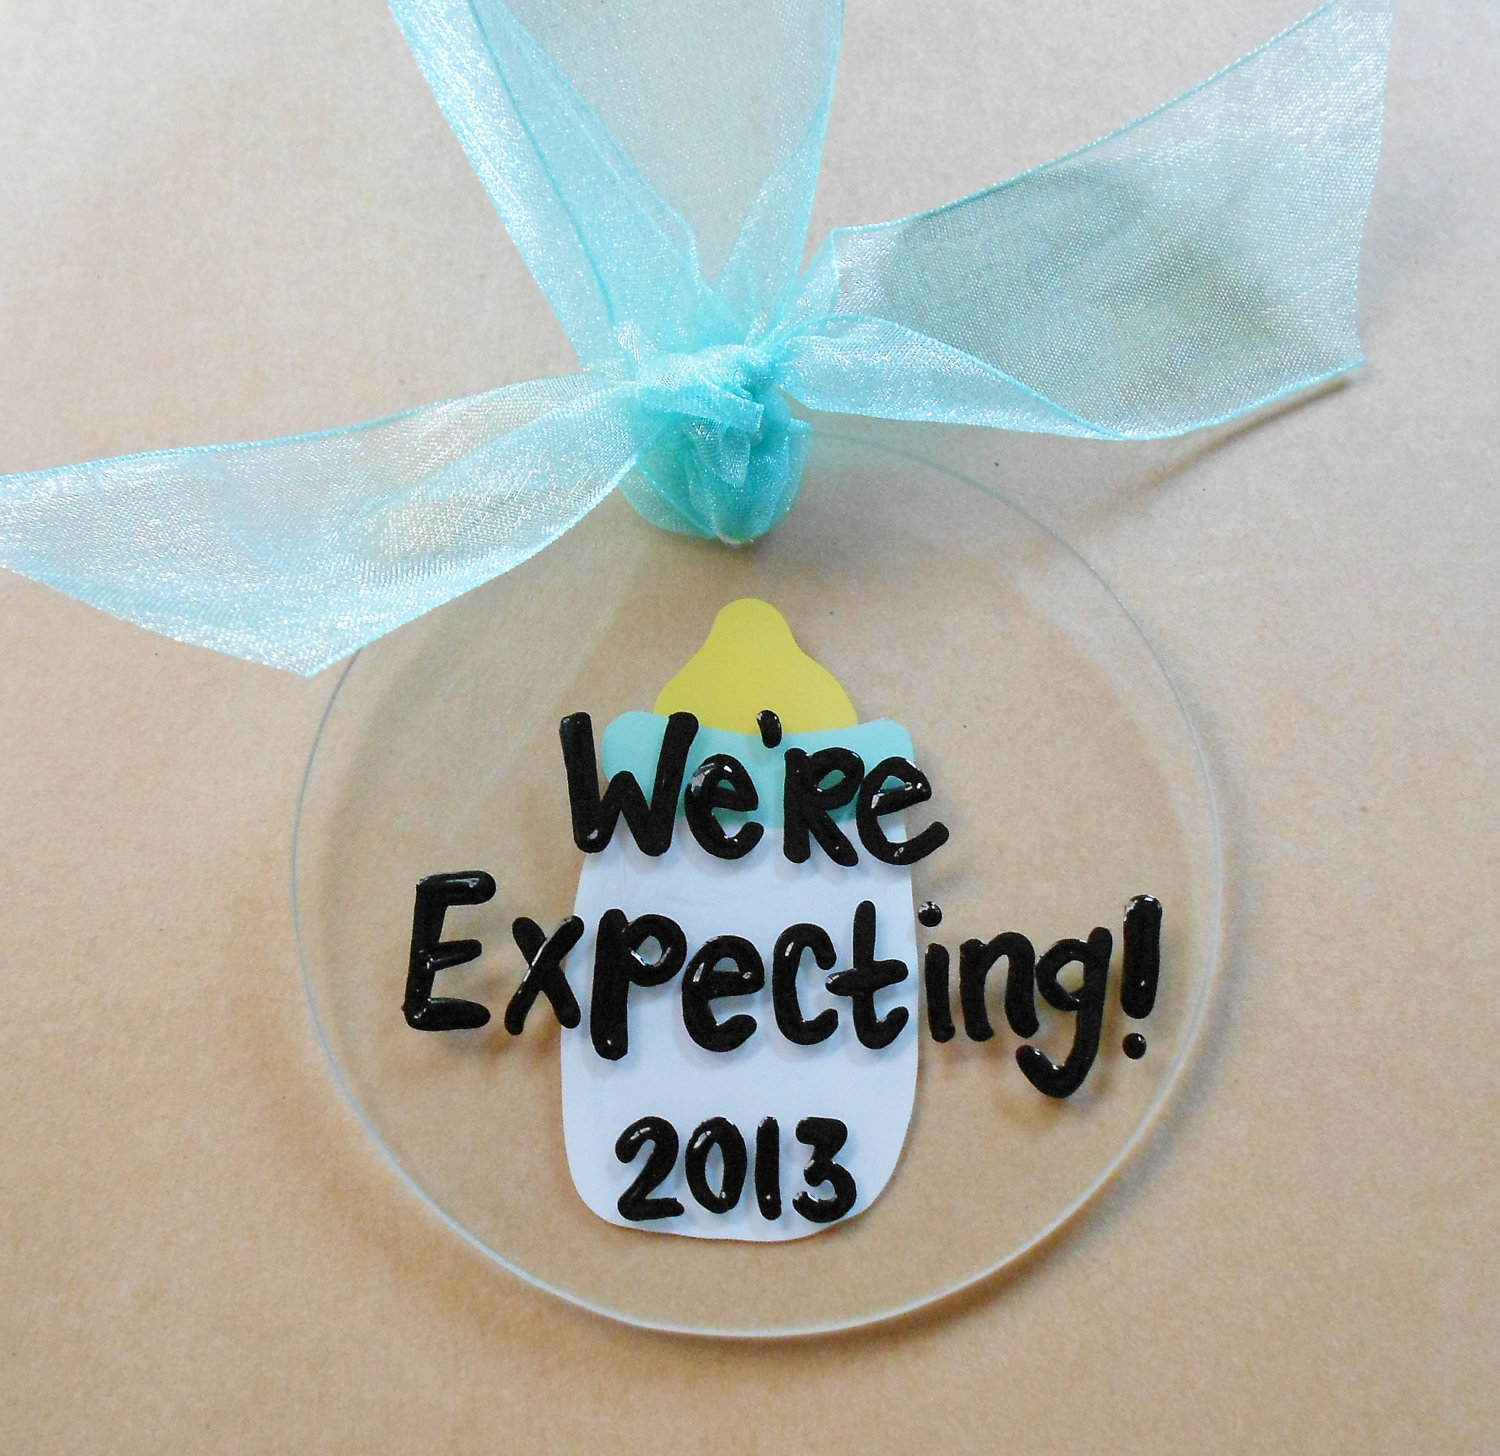 We're Expecting Baby Christmas Ornament by ...
